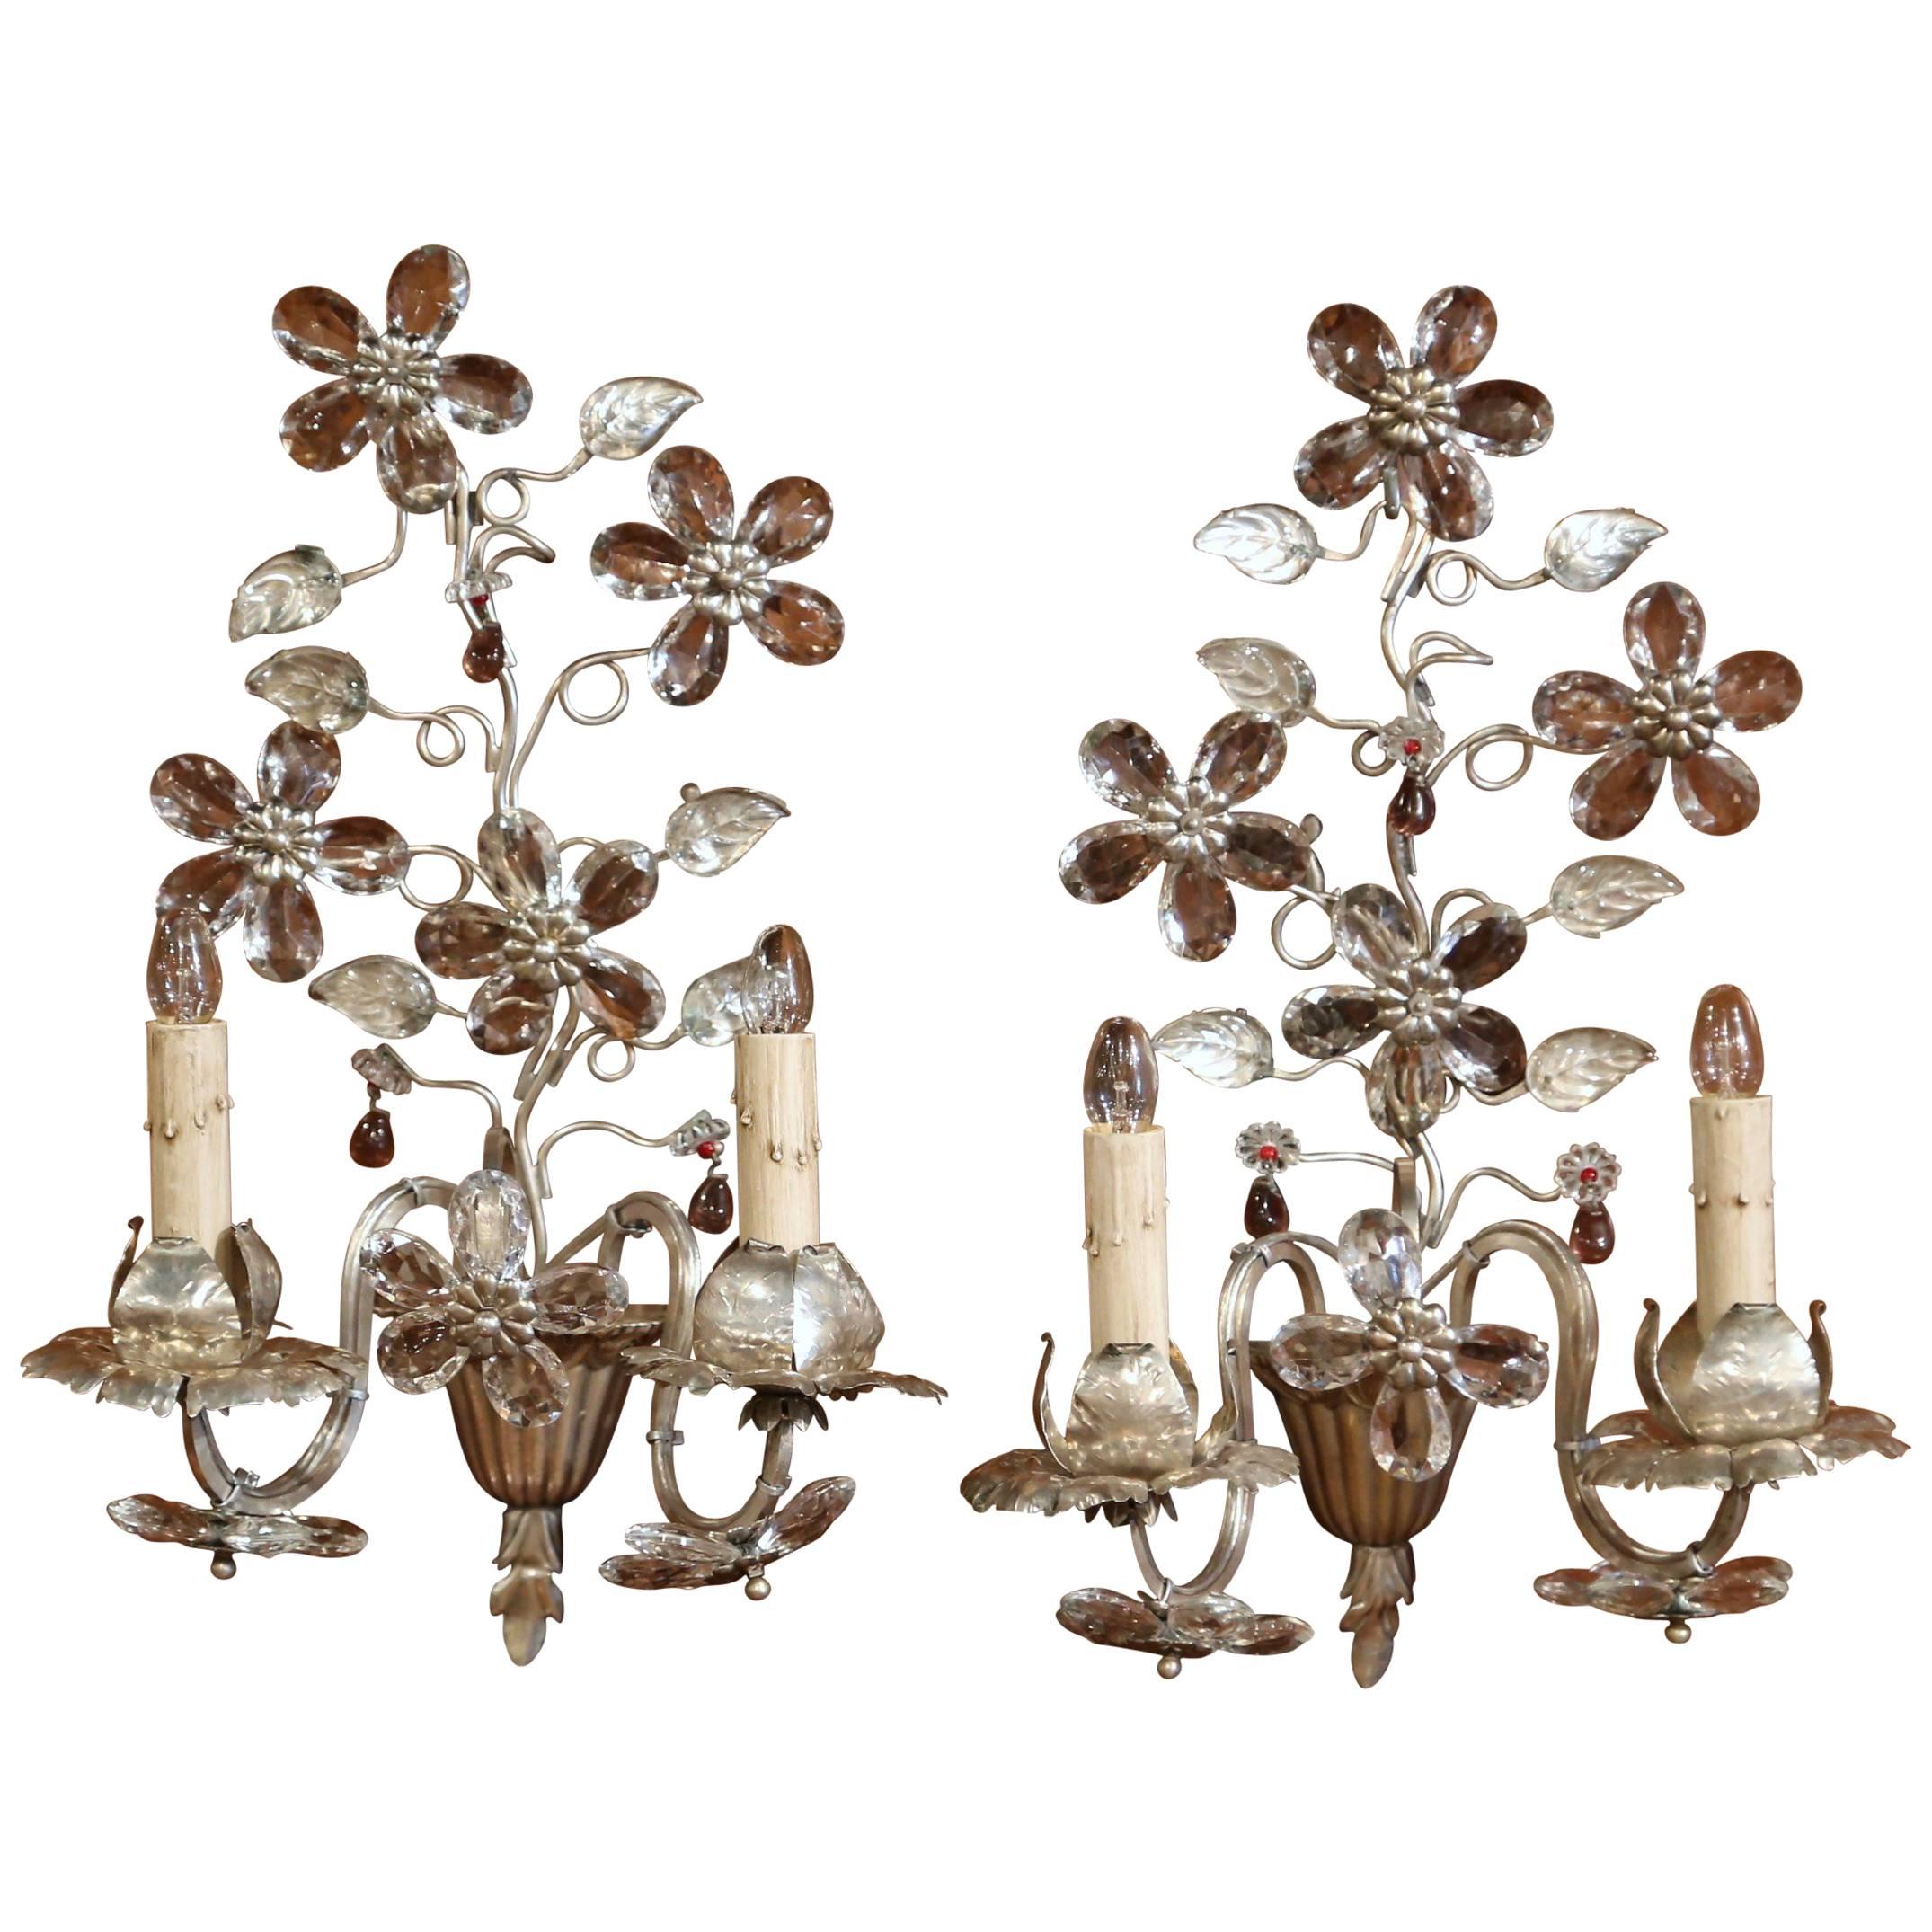 Pair of Mid-20th Century French Crystal and Silvered Sconces from Maison Bagues